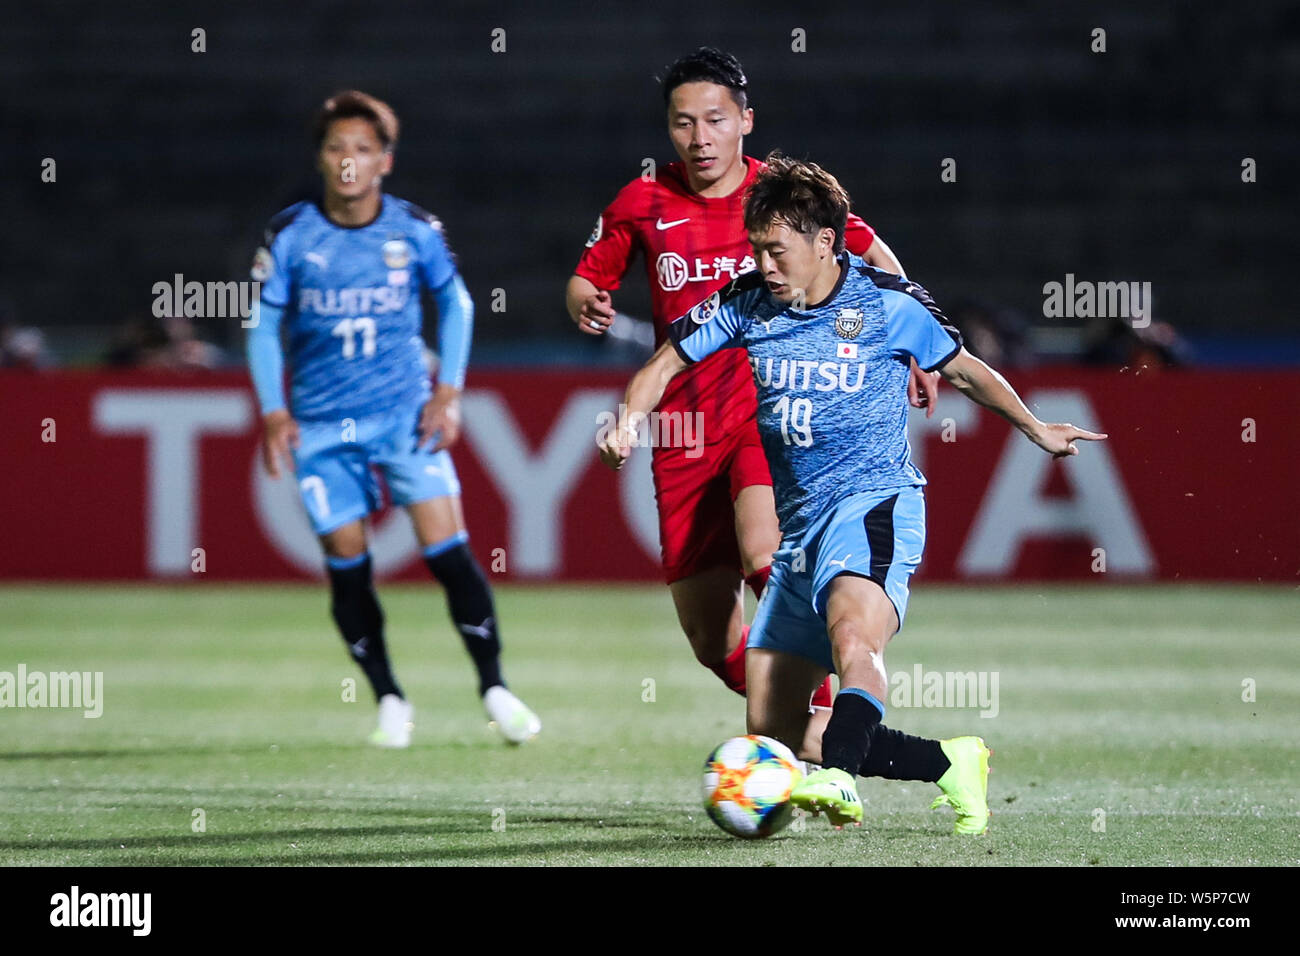 Manabu Saito, left, of Japan's Kawasaki Frontale F.C. passes the ball against a player of China's Shanghai SIPG in the 5th round of group H match duri Stock Photo